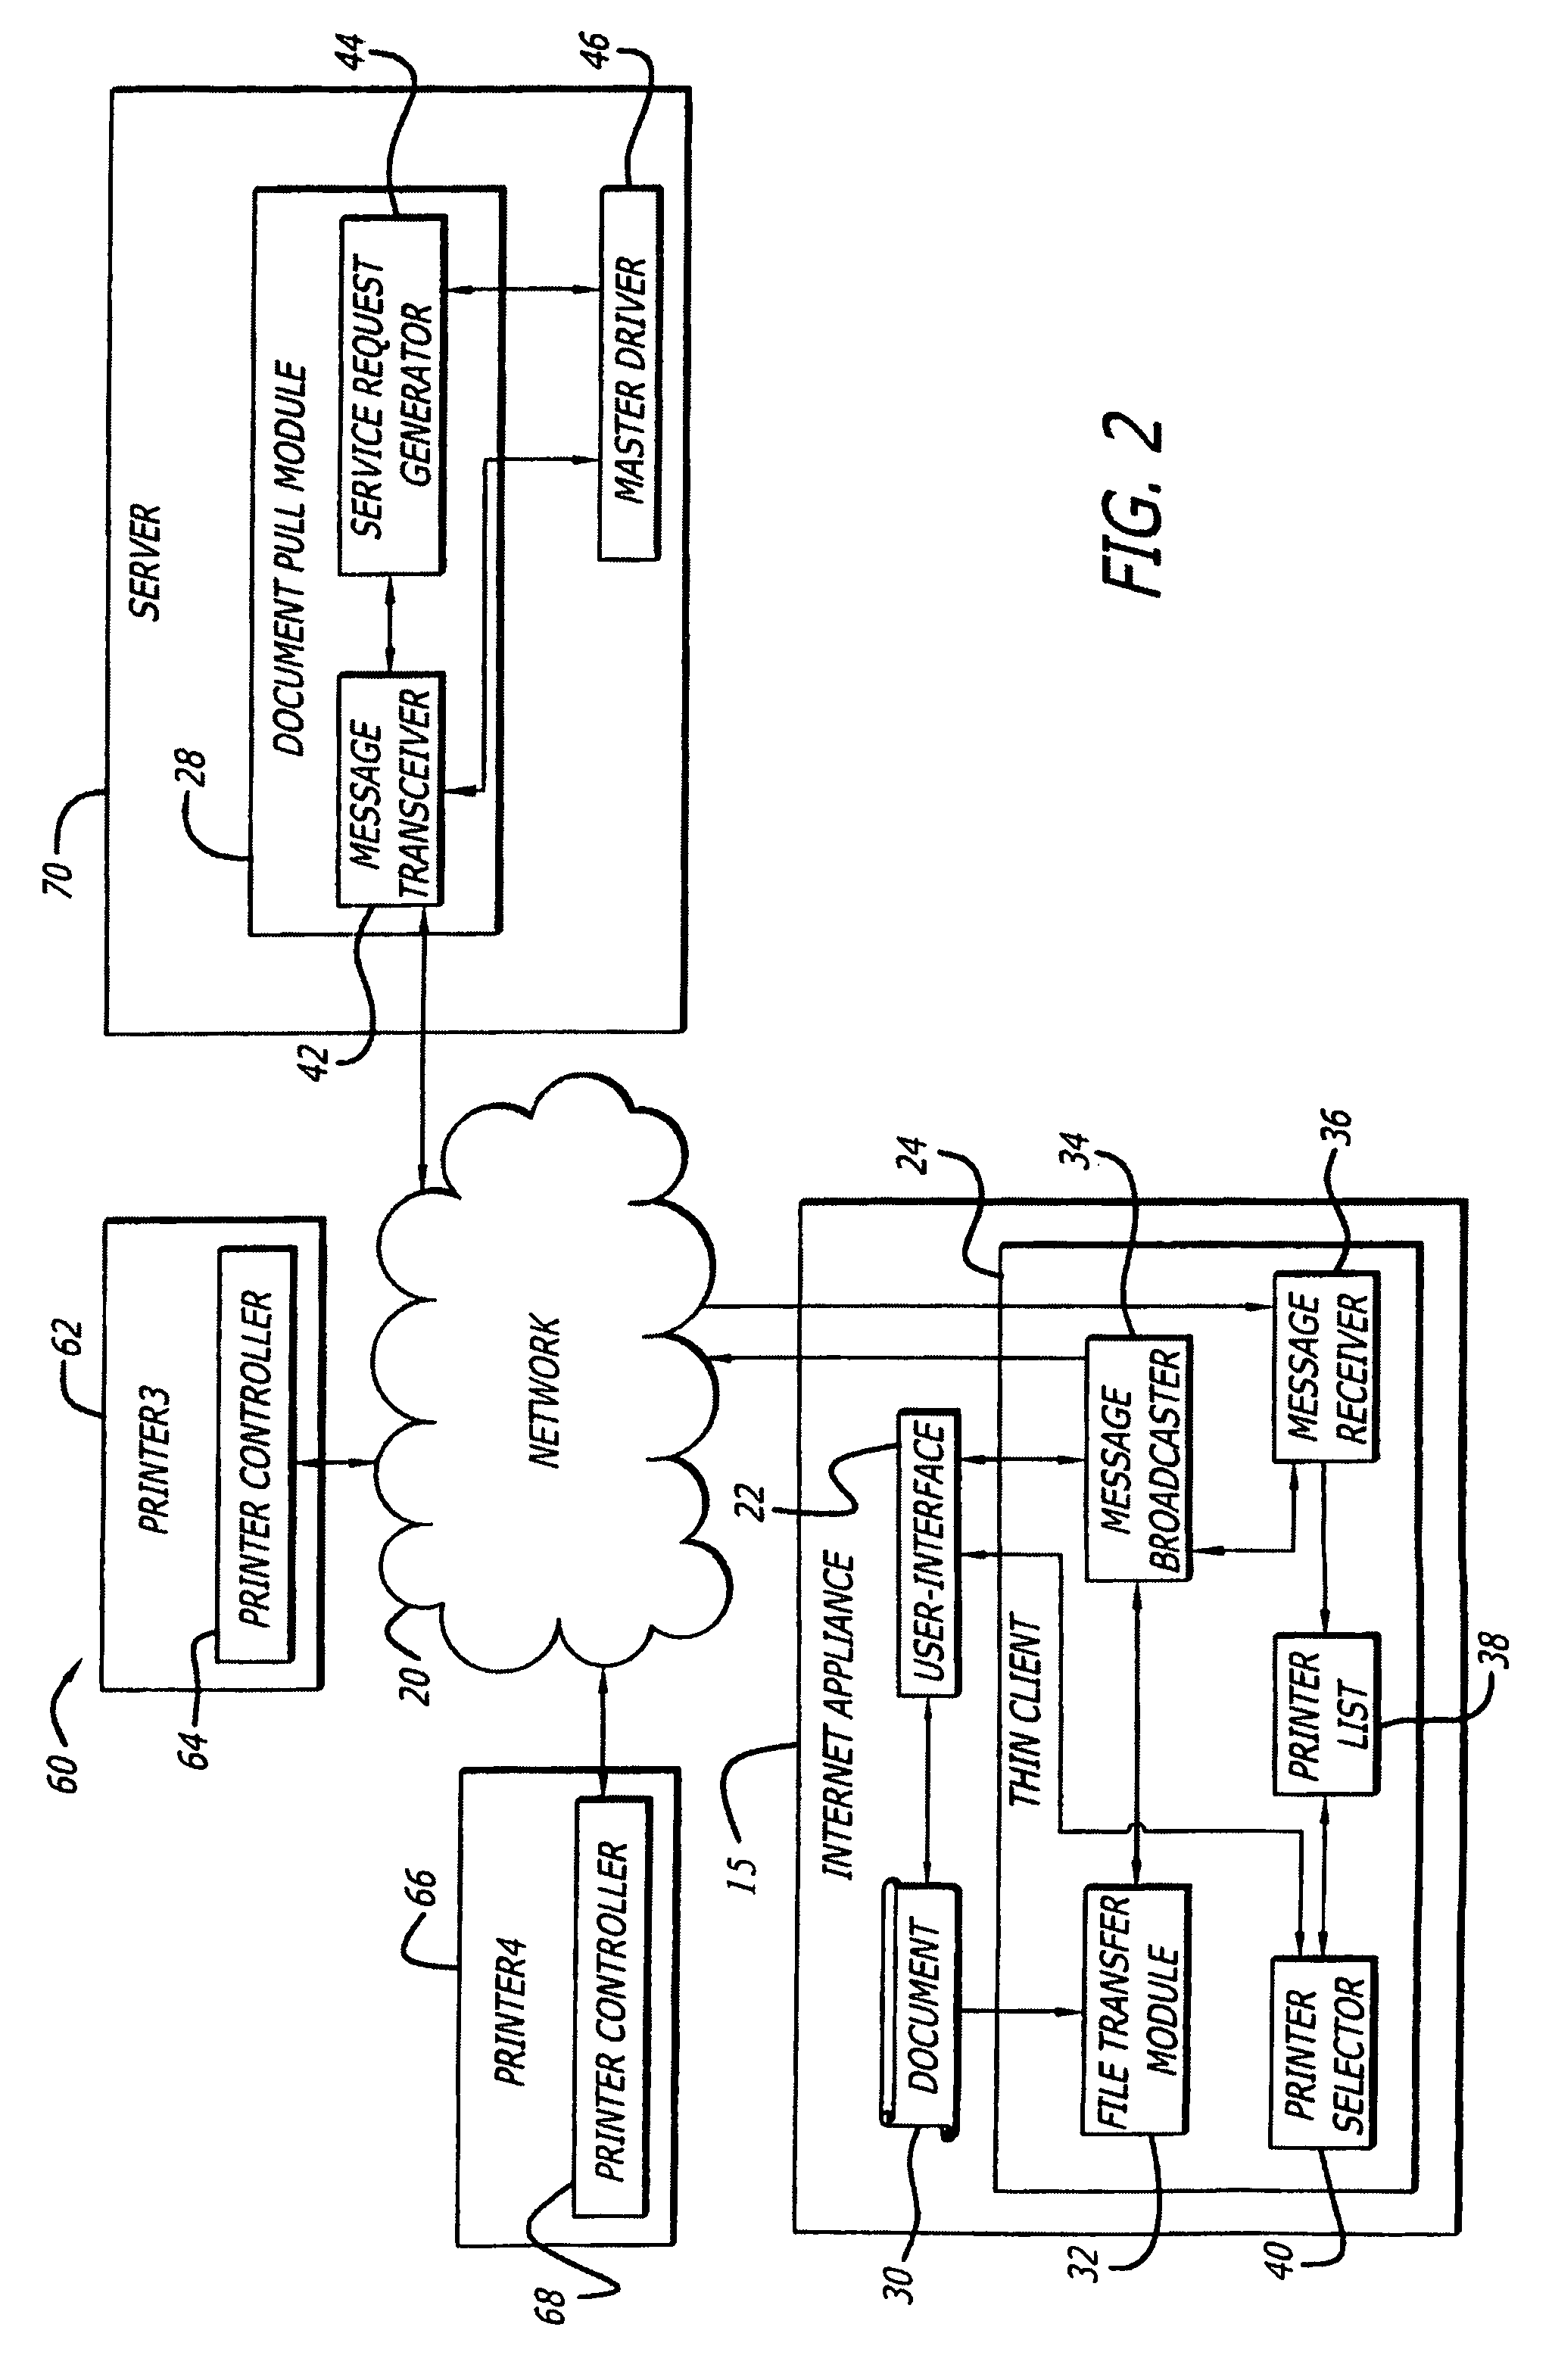 System and method for facilitating network printing